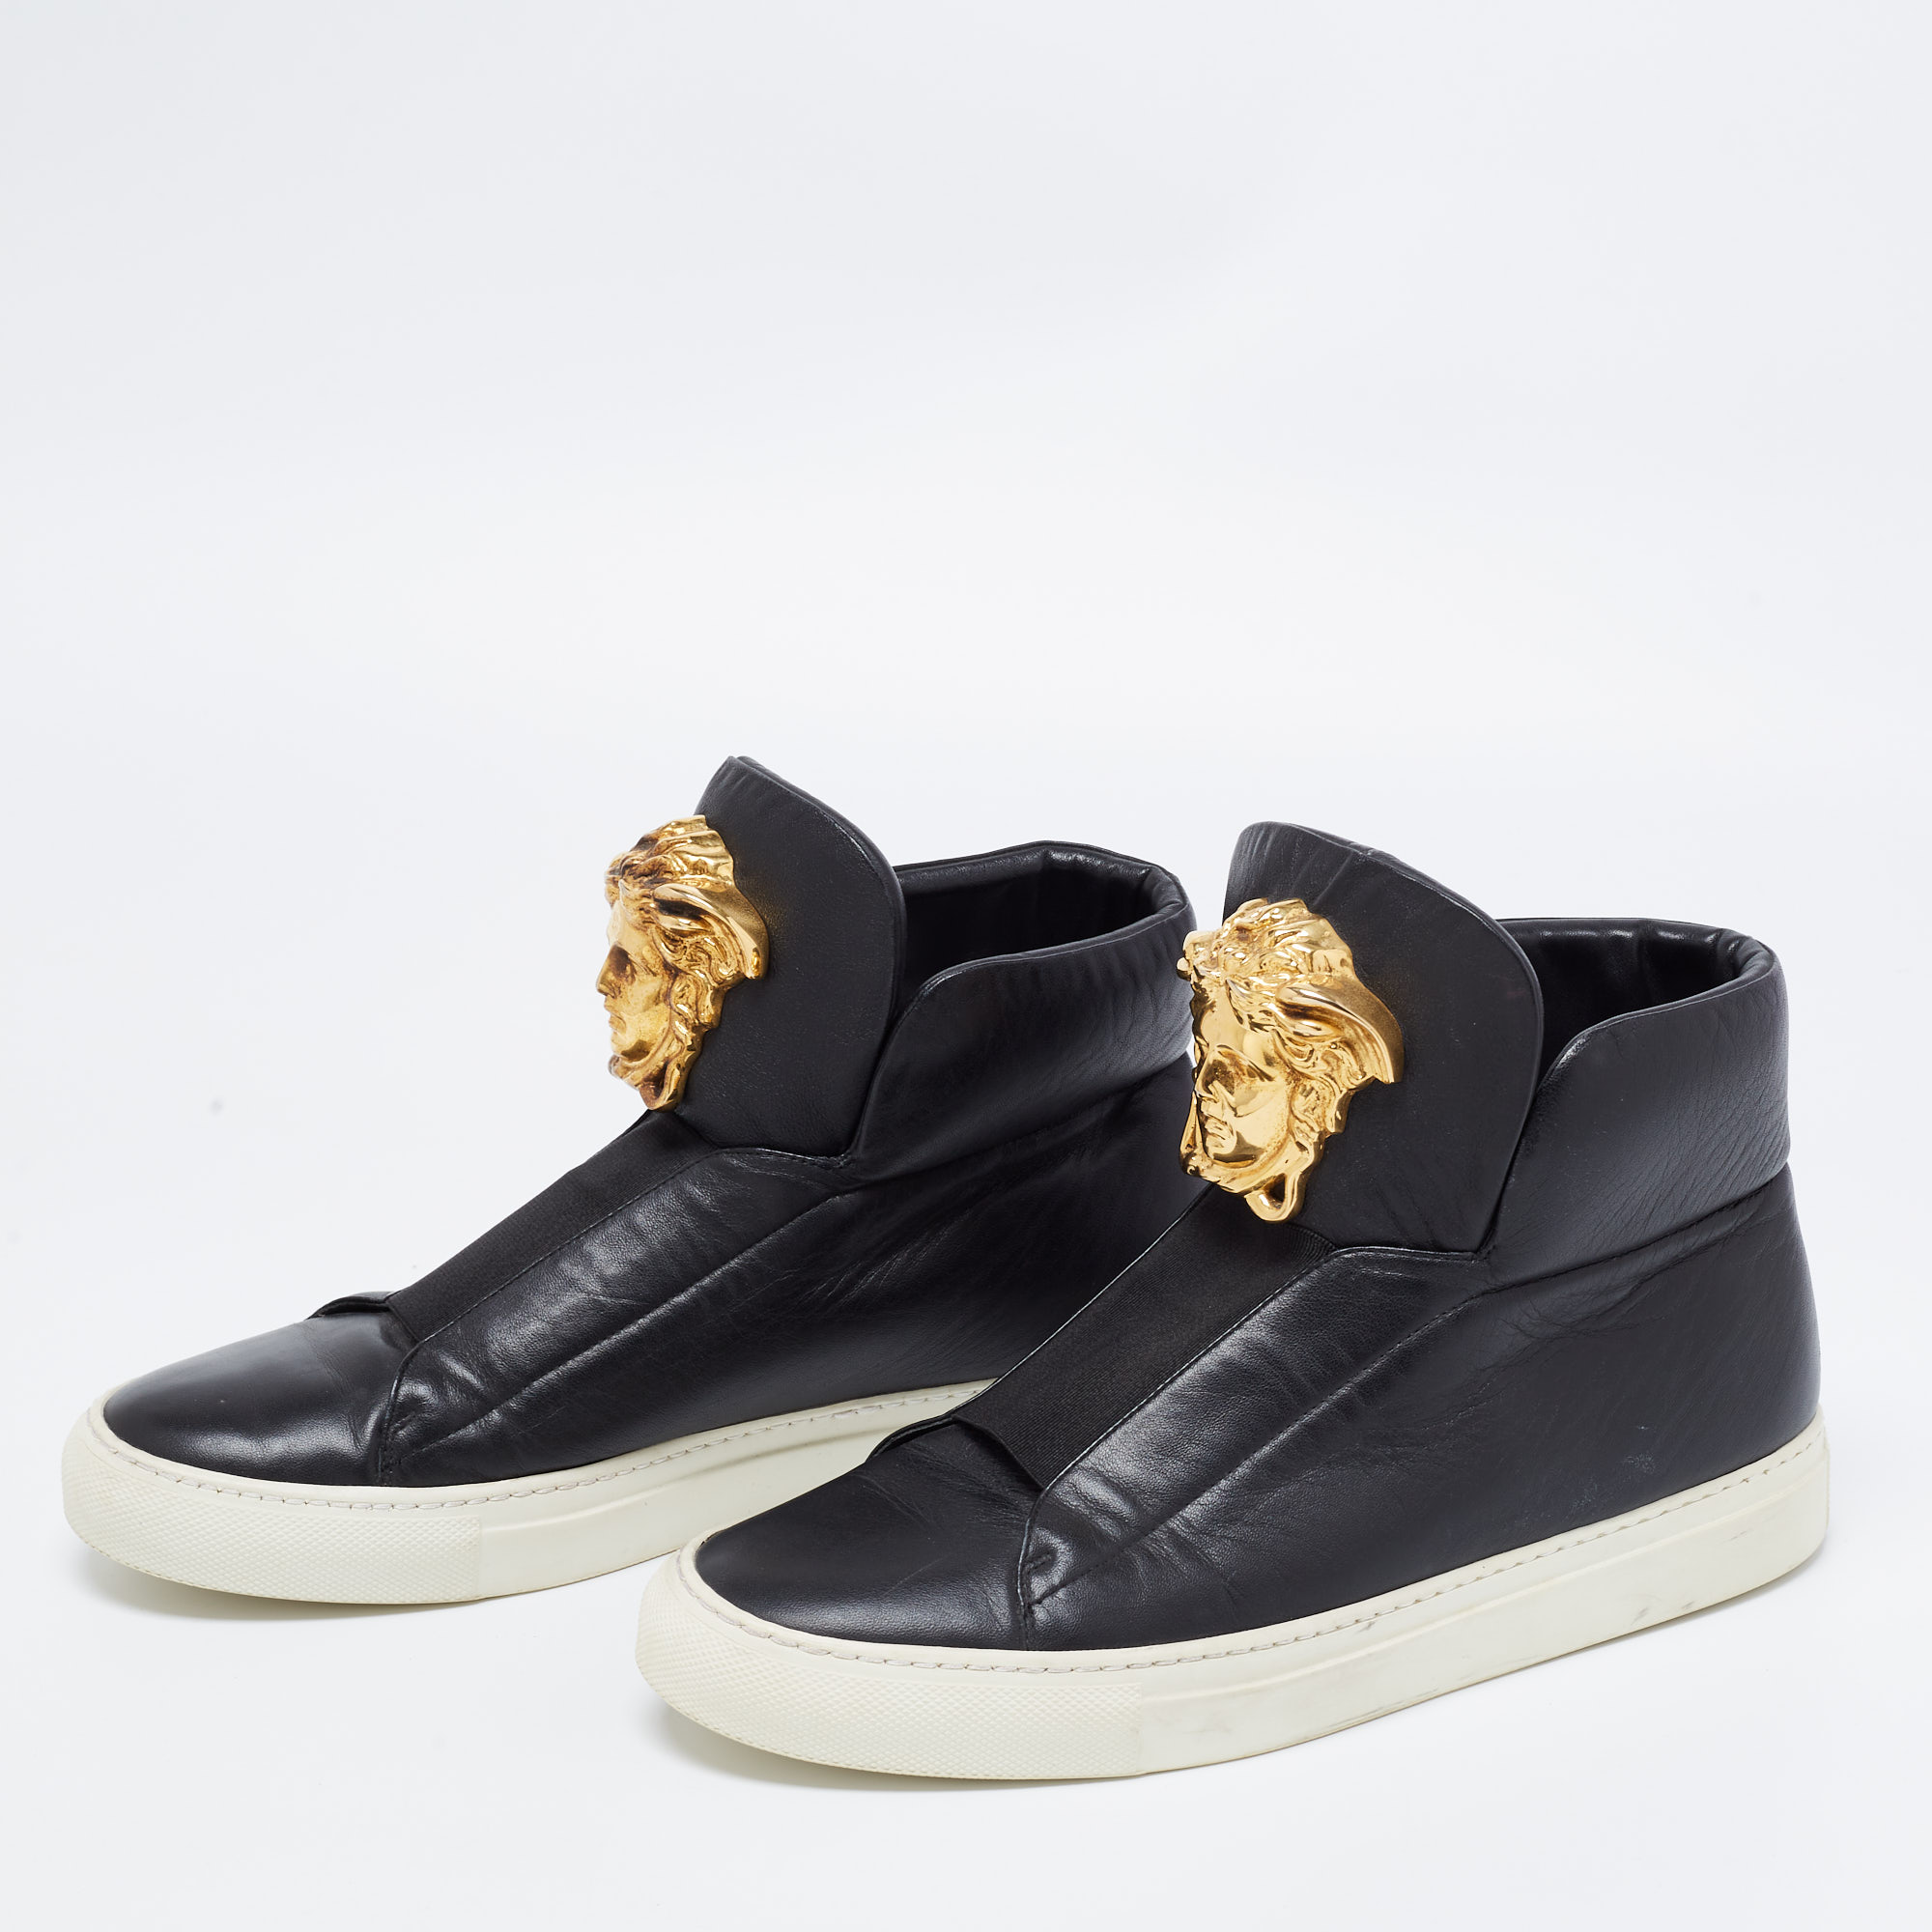 

Versace Black Leather Medusa Palazzo Slip On High Top Sneakers Size